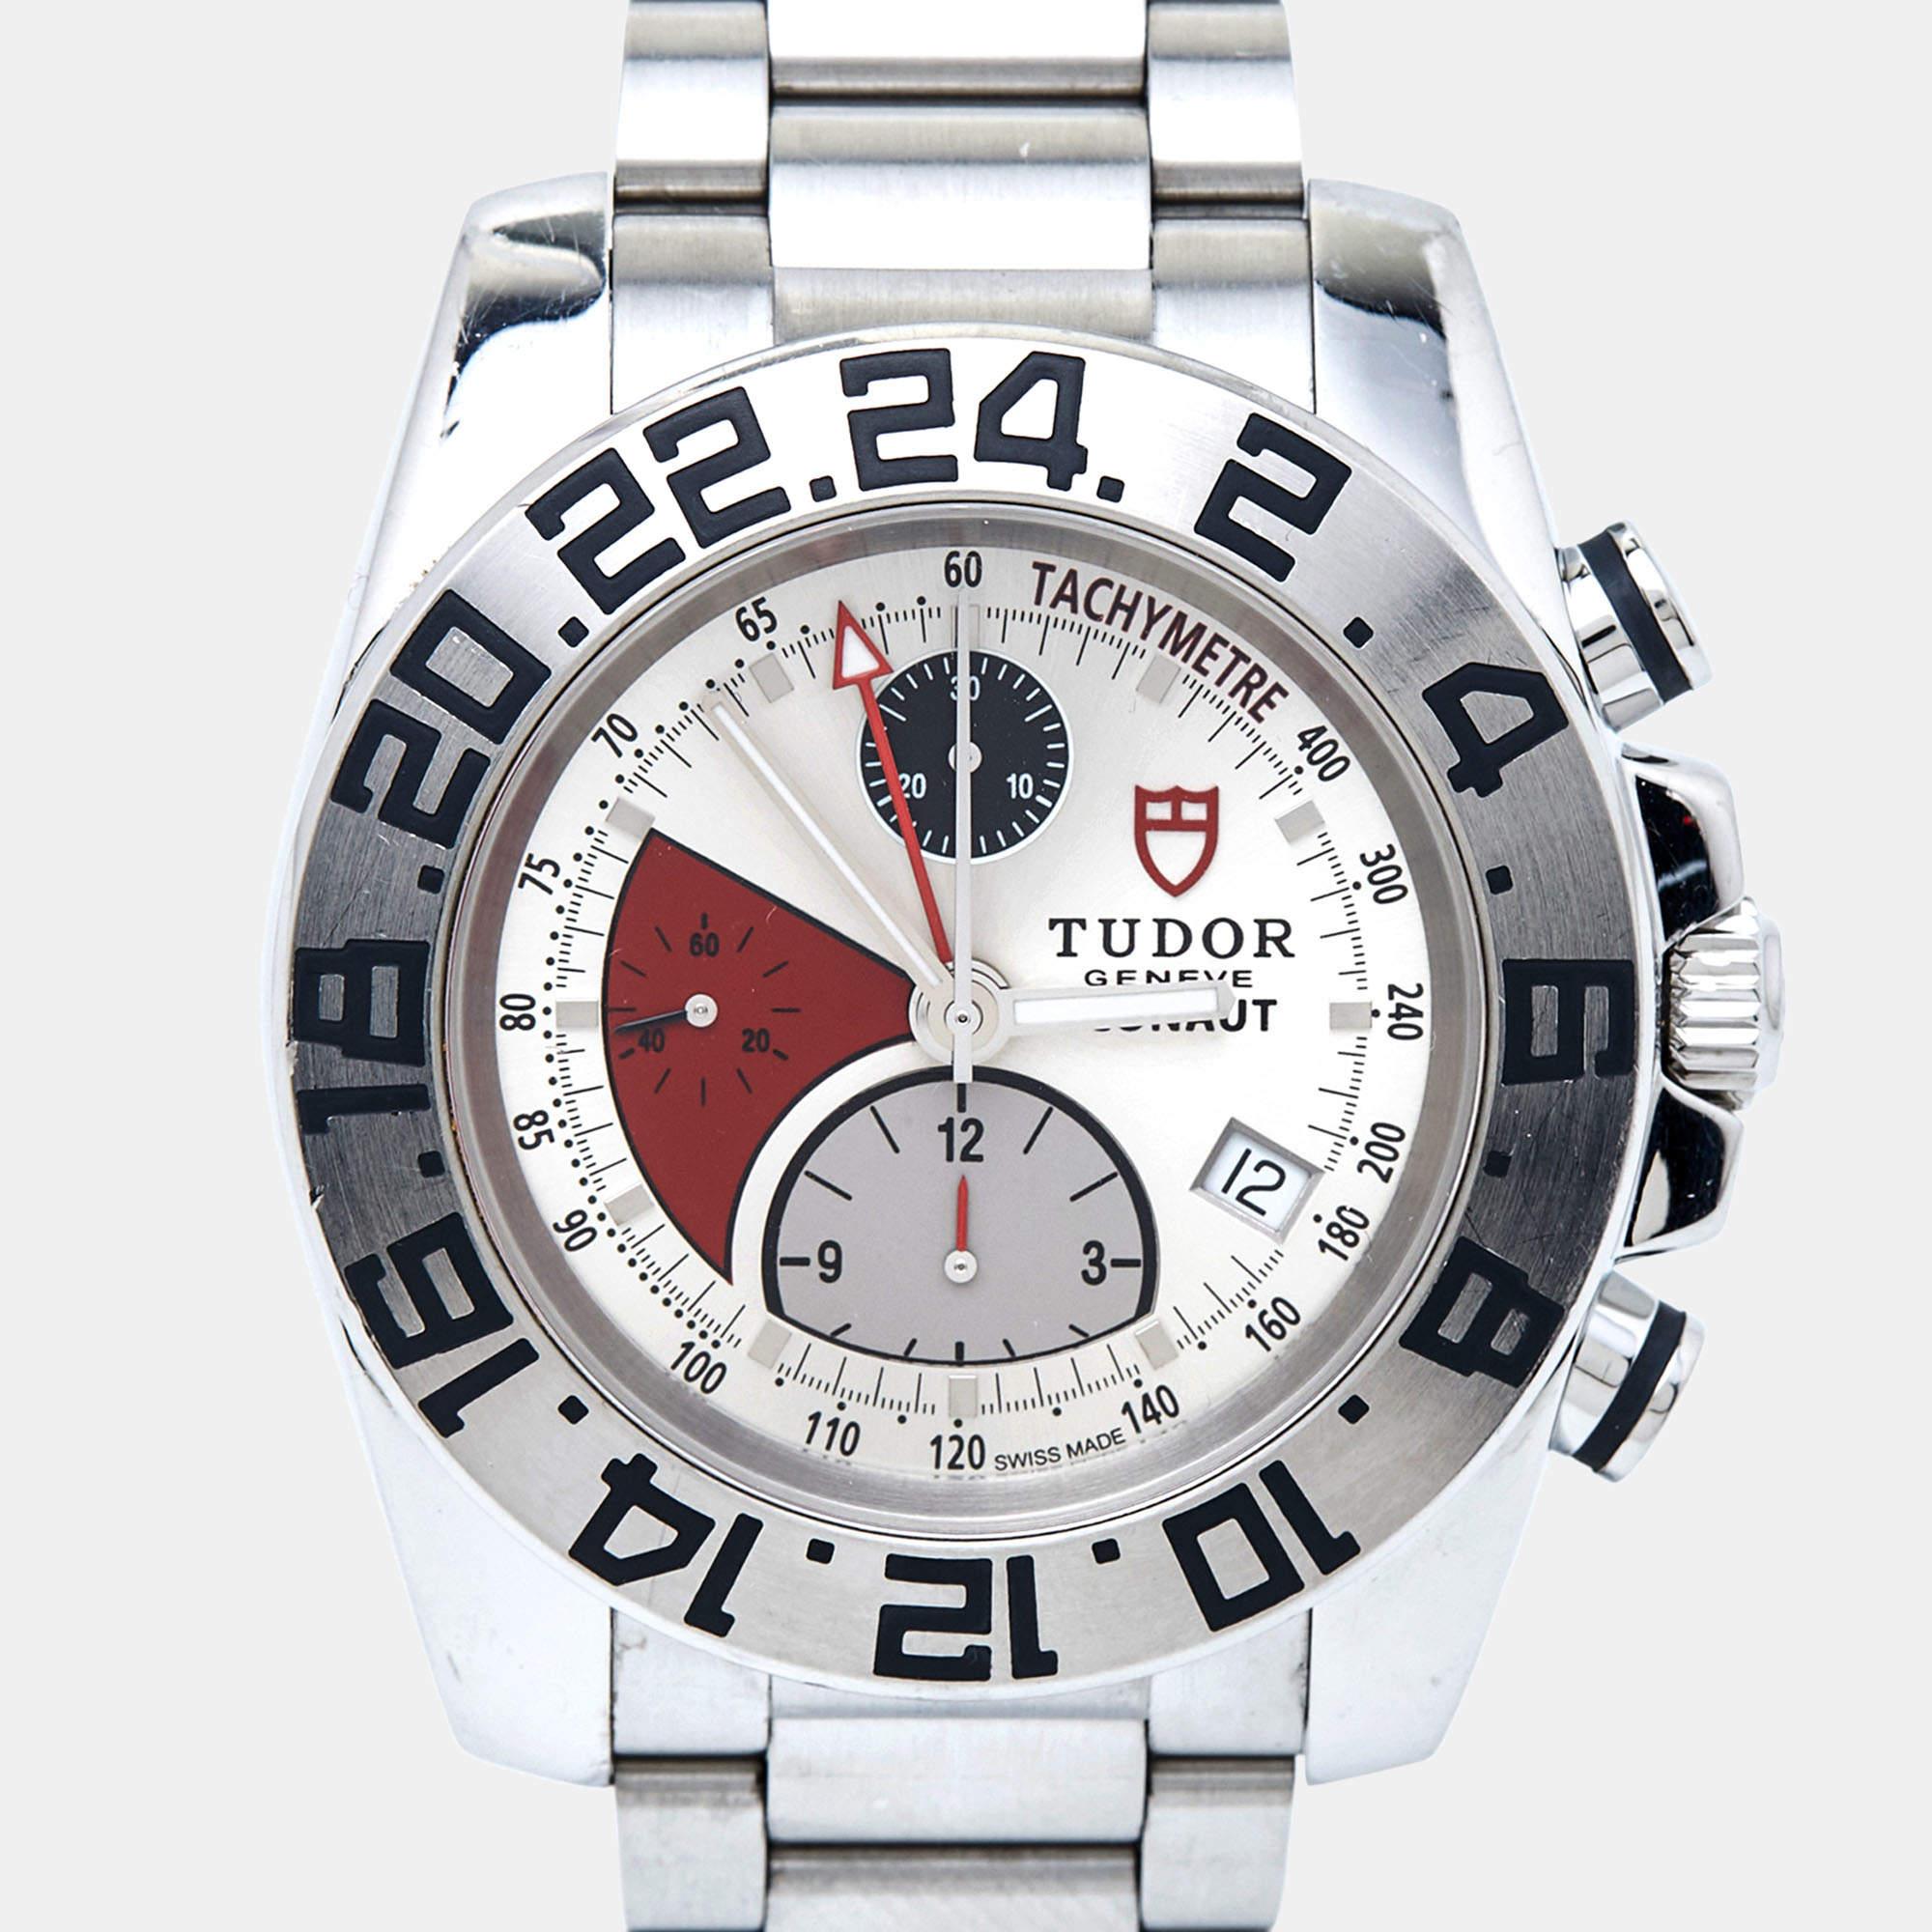 Tudor Silver Stainless Steel GMT Chronograph Iconaut Men's Wristwatch 44 mm 7